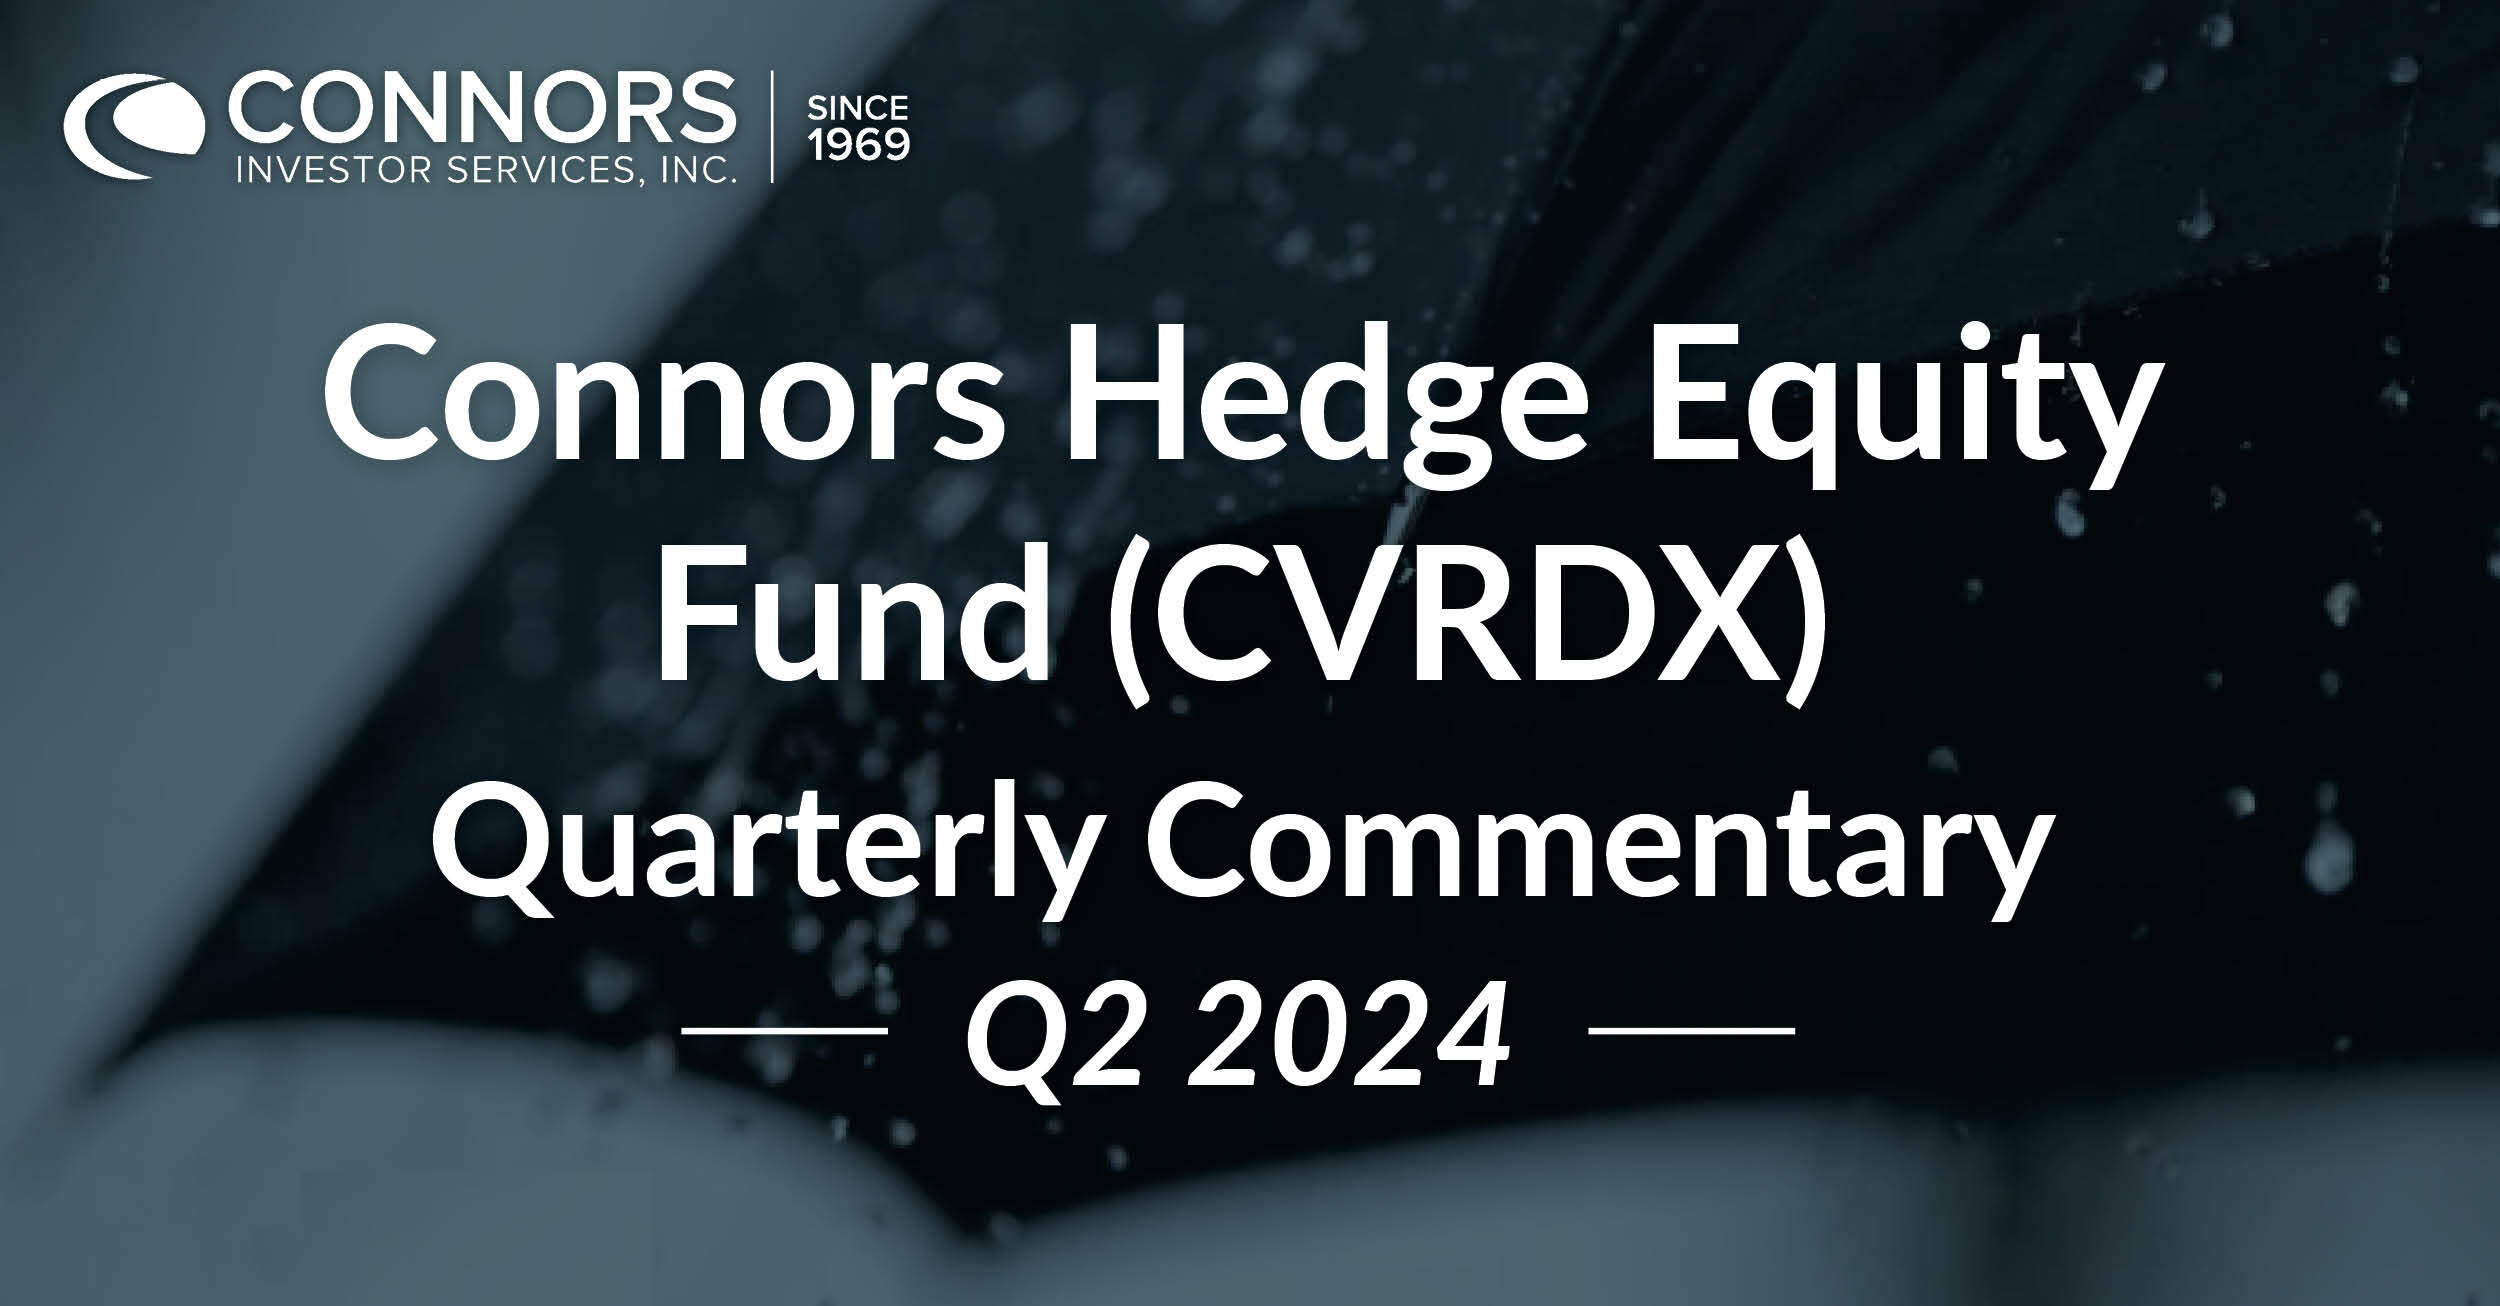 2024 Q2 Connors Hedged Equity Fund (CVRDX) Quarterly Commentary